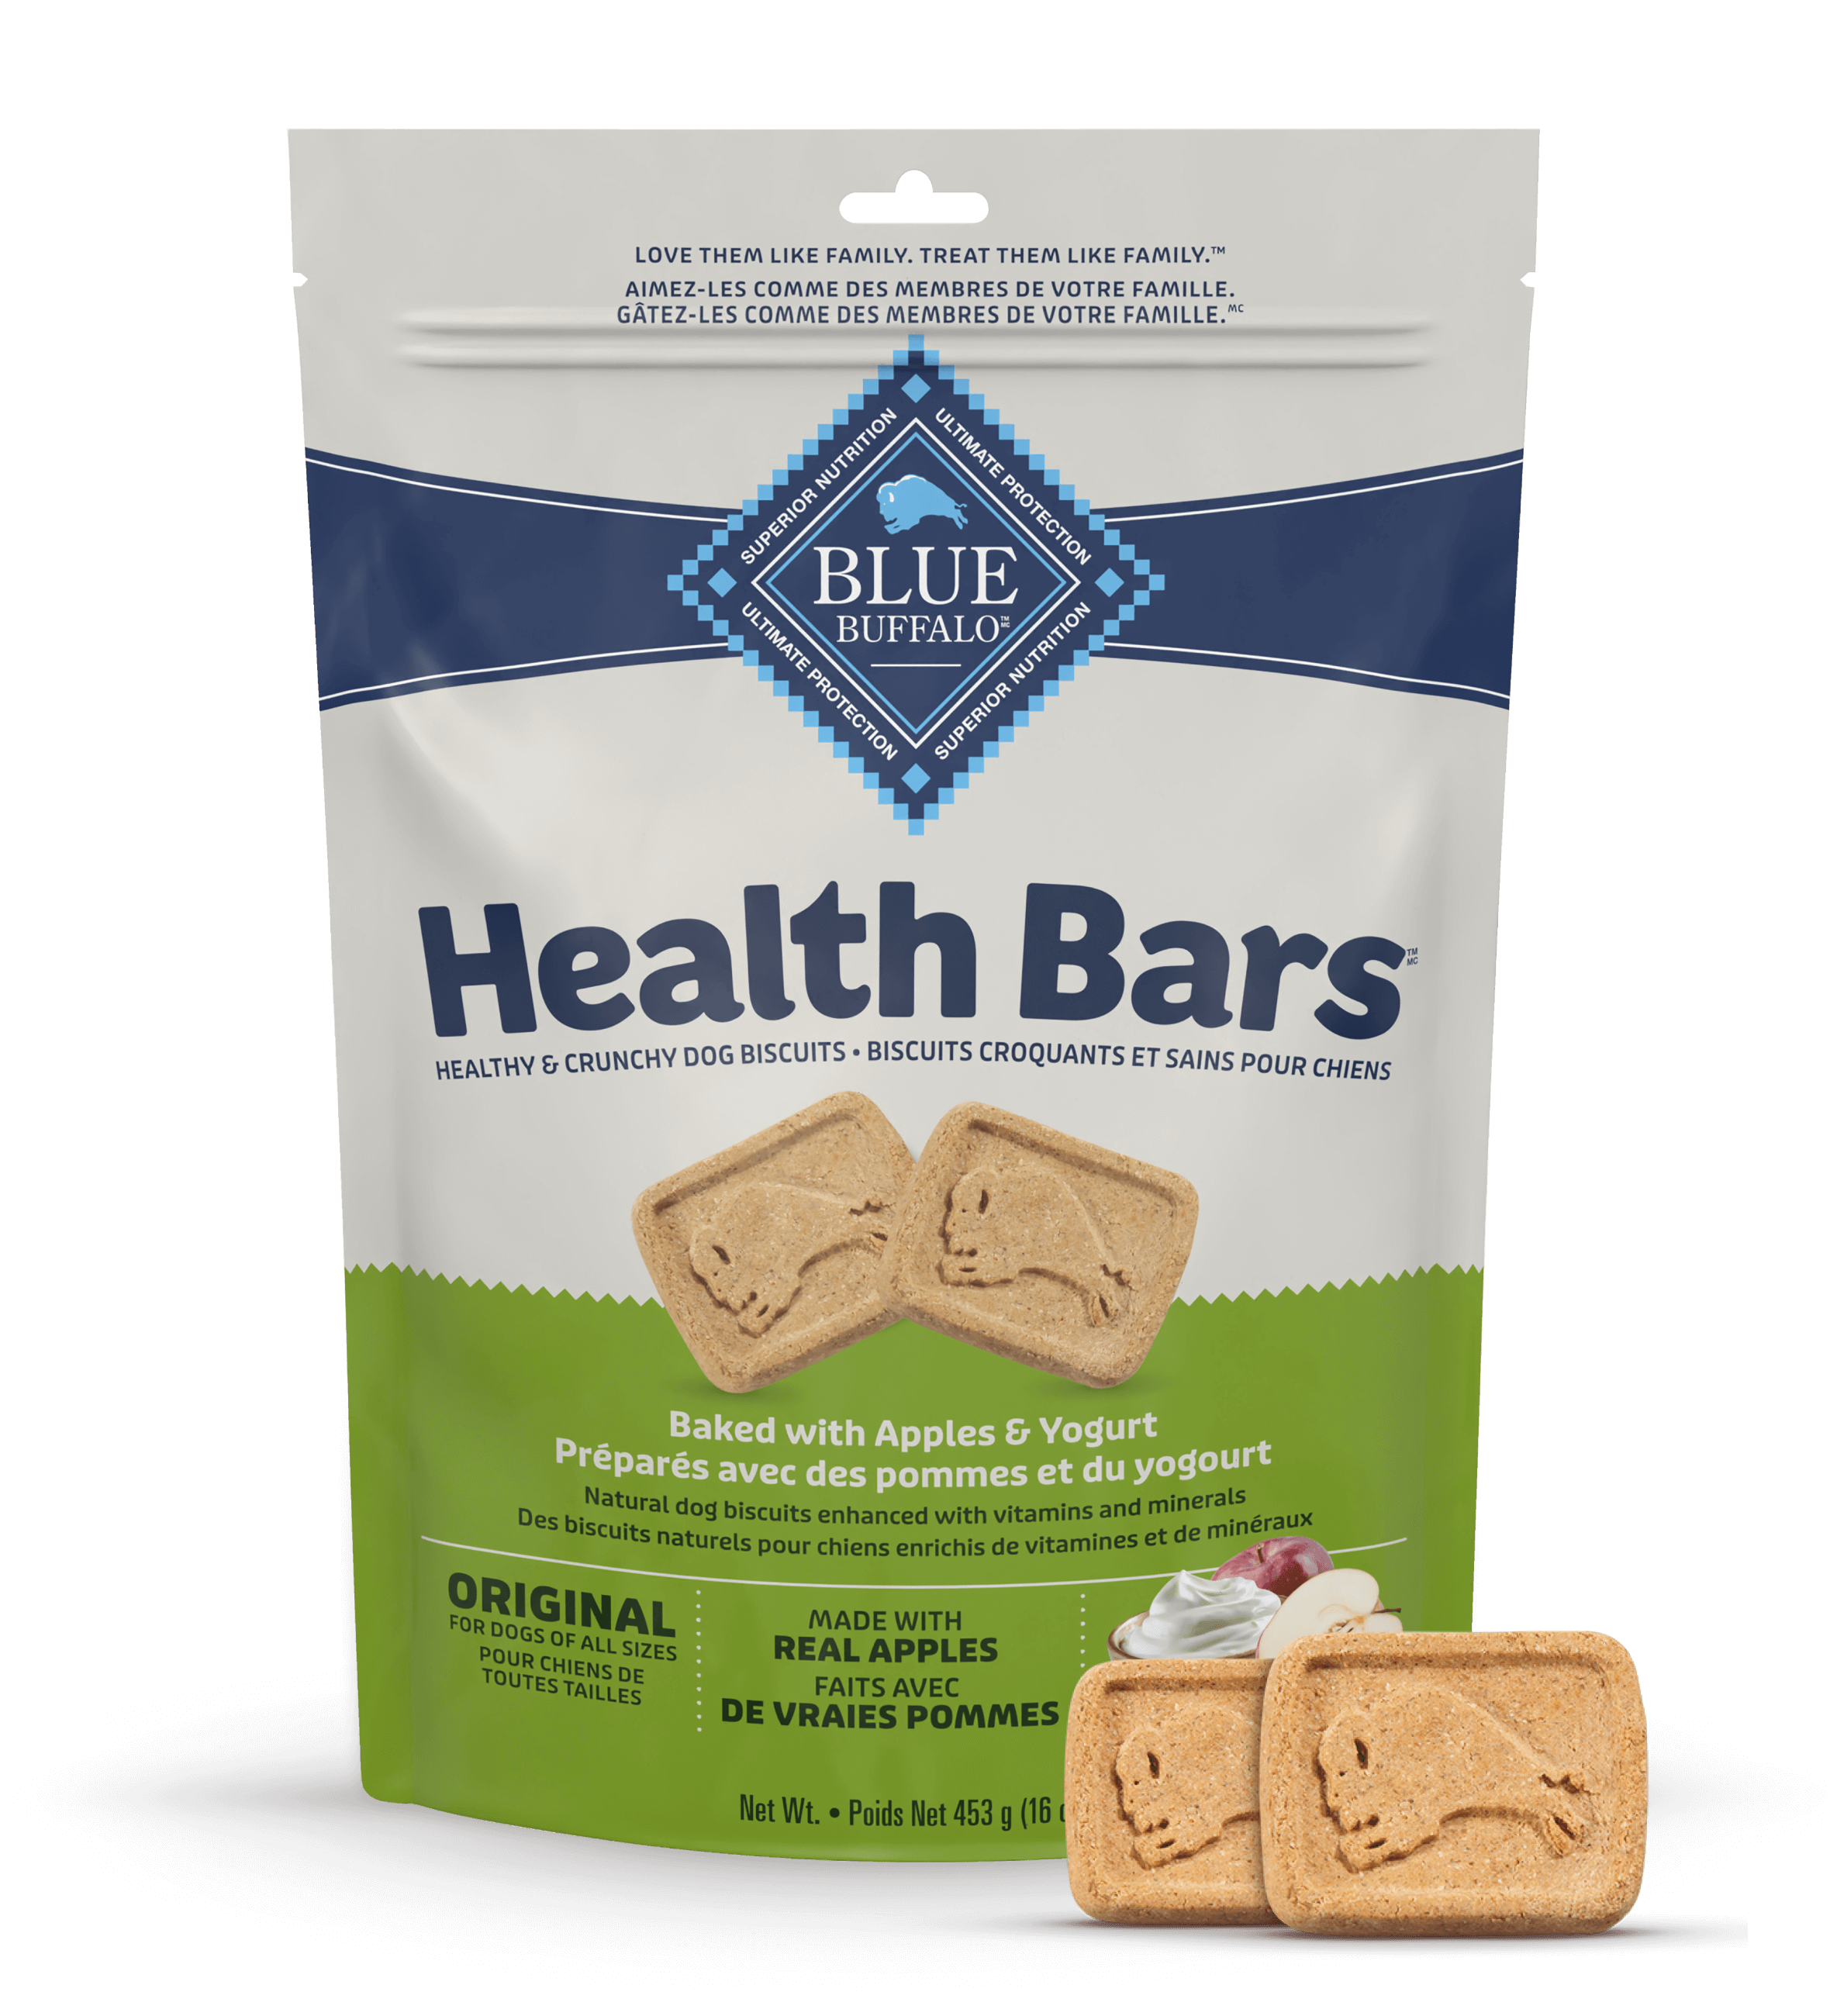 A package of Blue Buffalo Health Bars for dogs, baked with apples and yogurt, showcasing biscuits on the front.